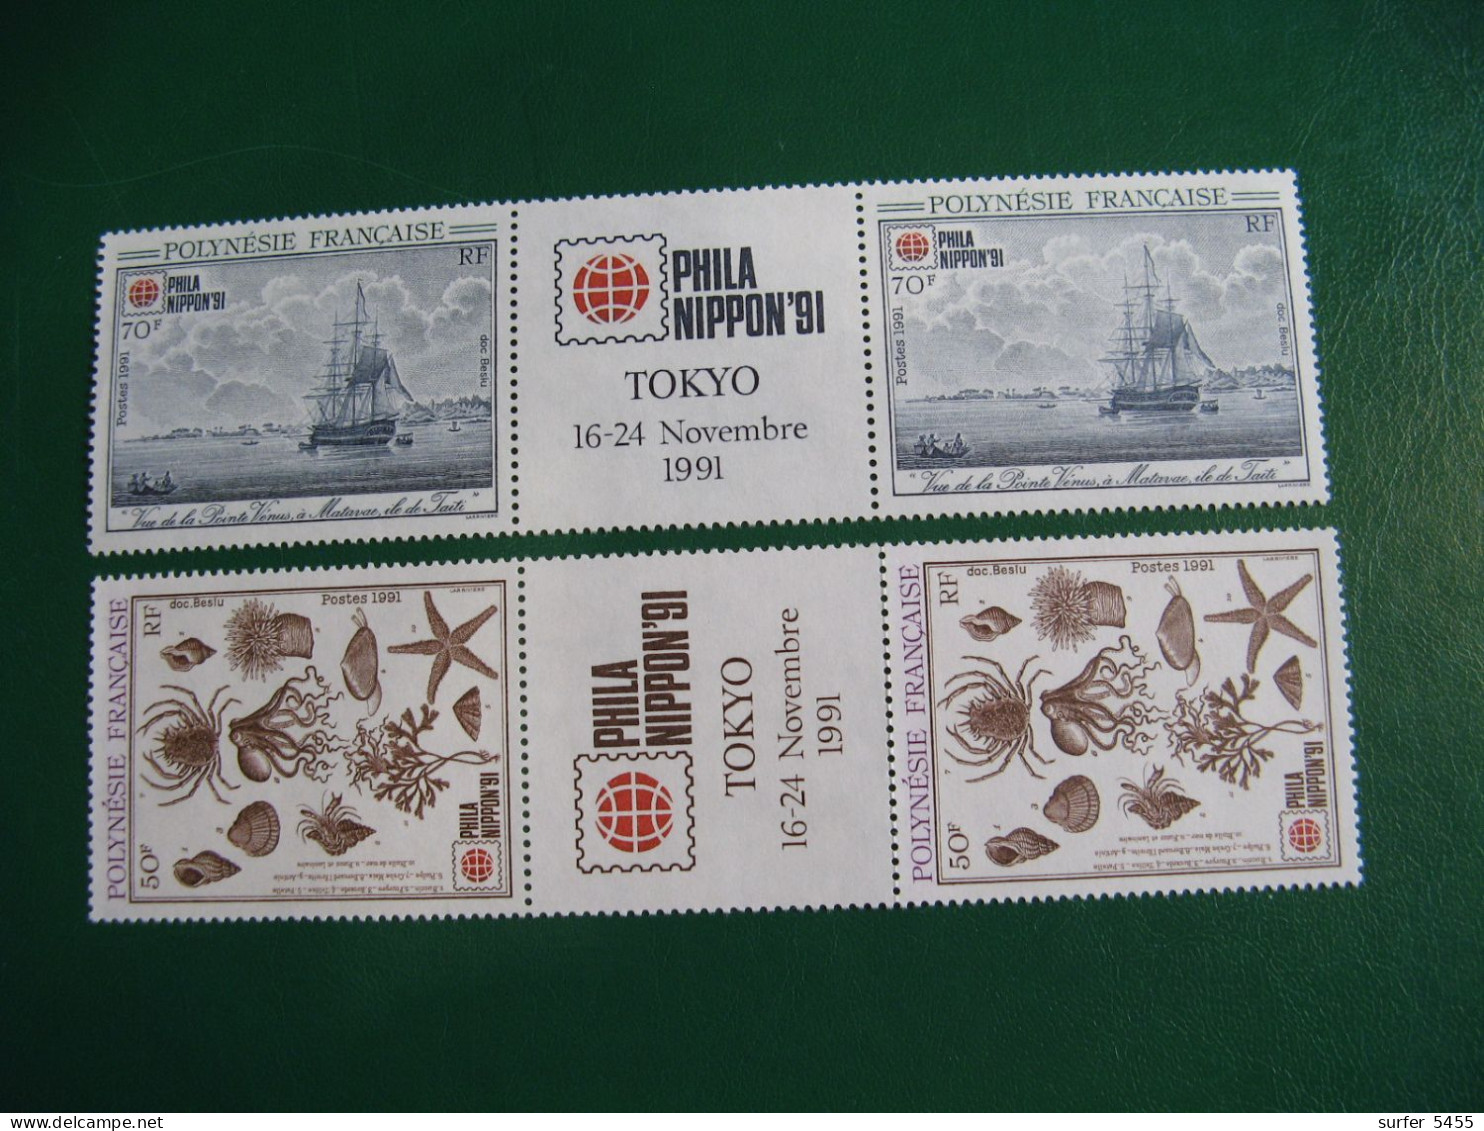 P0LYNESIE YVERT PO ORDINAIRE N° 393A/394A TIMBRES NEUFS ** LUXE - MNH - SERIES COMPLETES- COTE 8,40 EUROS - Ungebraucht